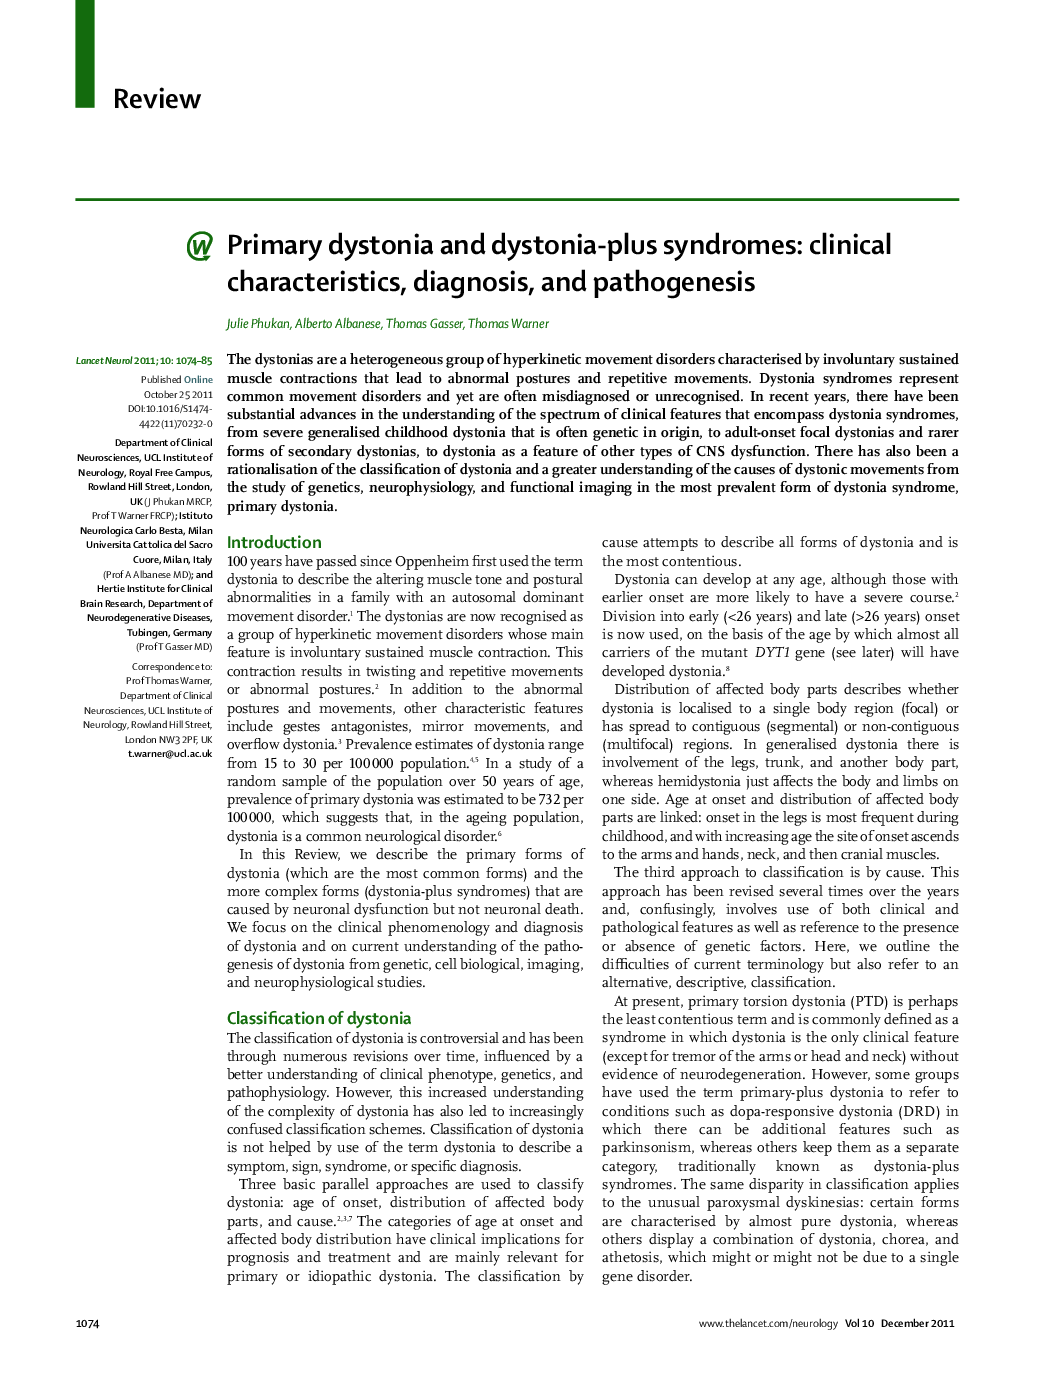 Primary dystonia and dystonia-plus syndromes: clinical characteristics, diagnosis, and pathogenesis